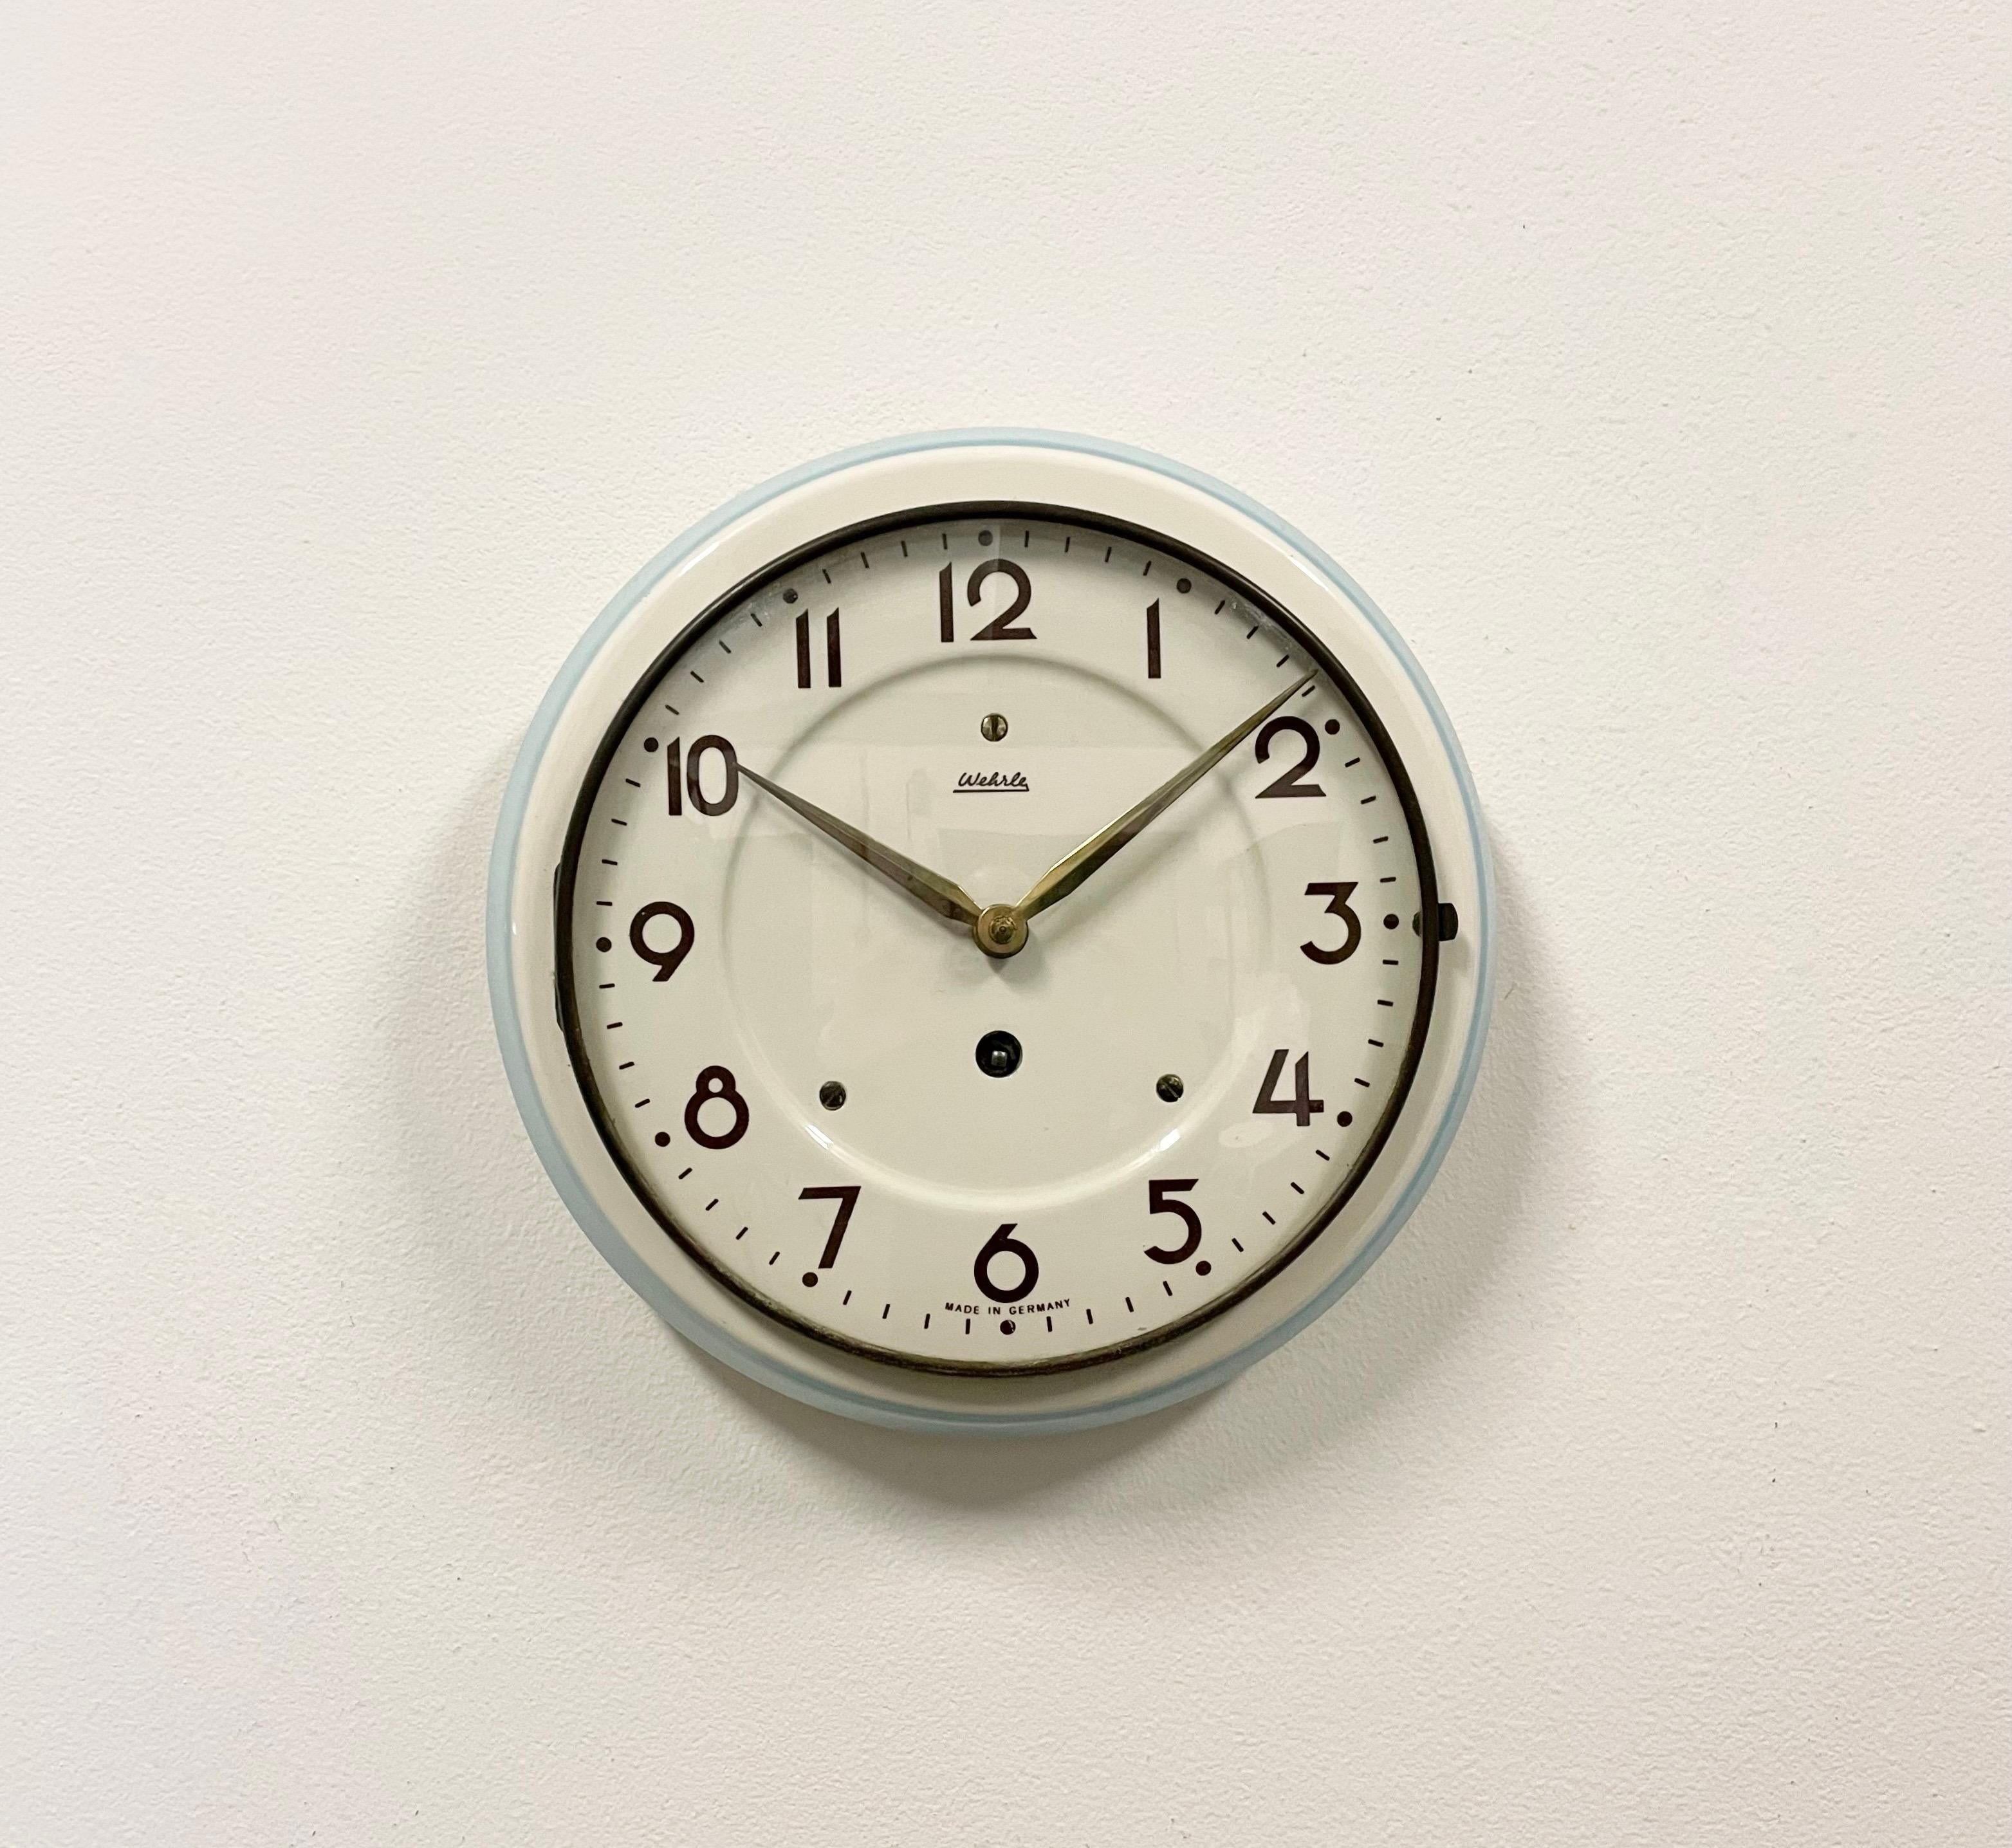 Vintage ceramic winding kitchen wall clock made by Wehrle in Germany during the 1960s.It features a white and blue ceramic body and a convex clear glass cover with brass frame. The original mechanic movement works perfectly. Key included. Very good